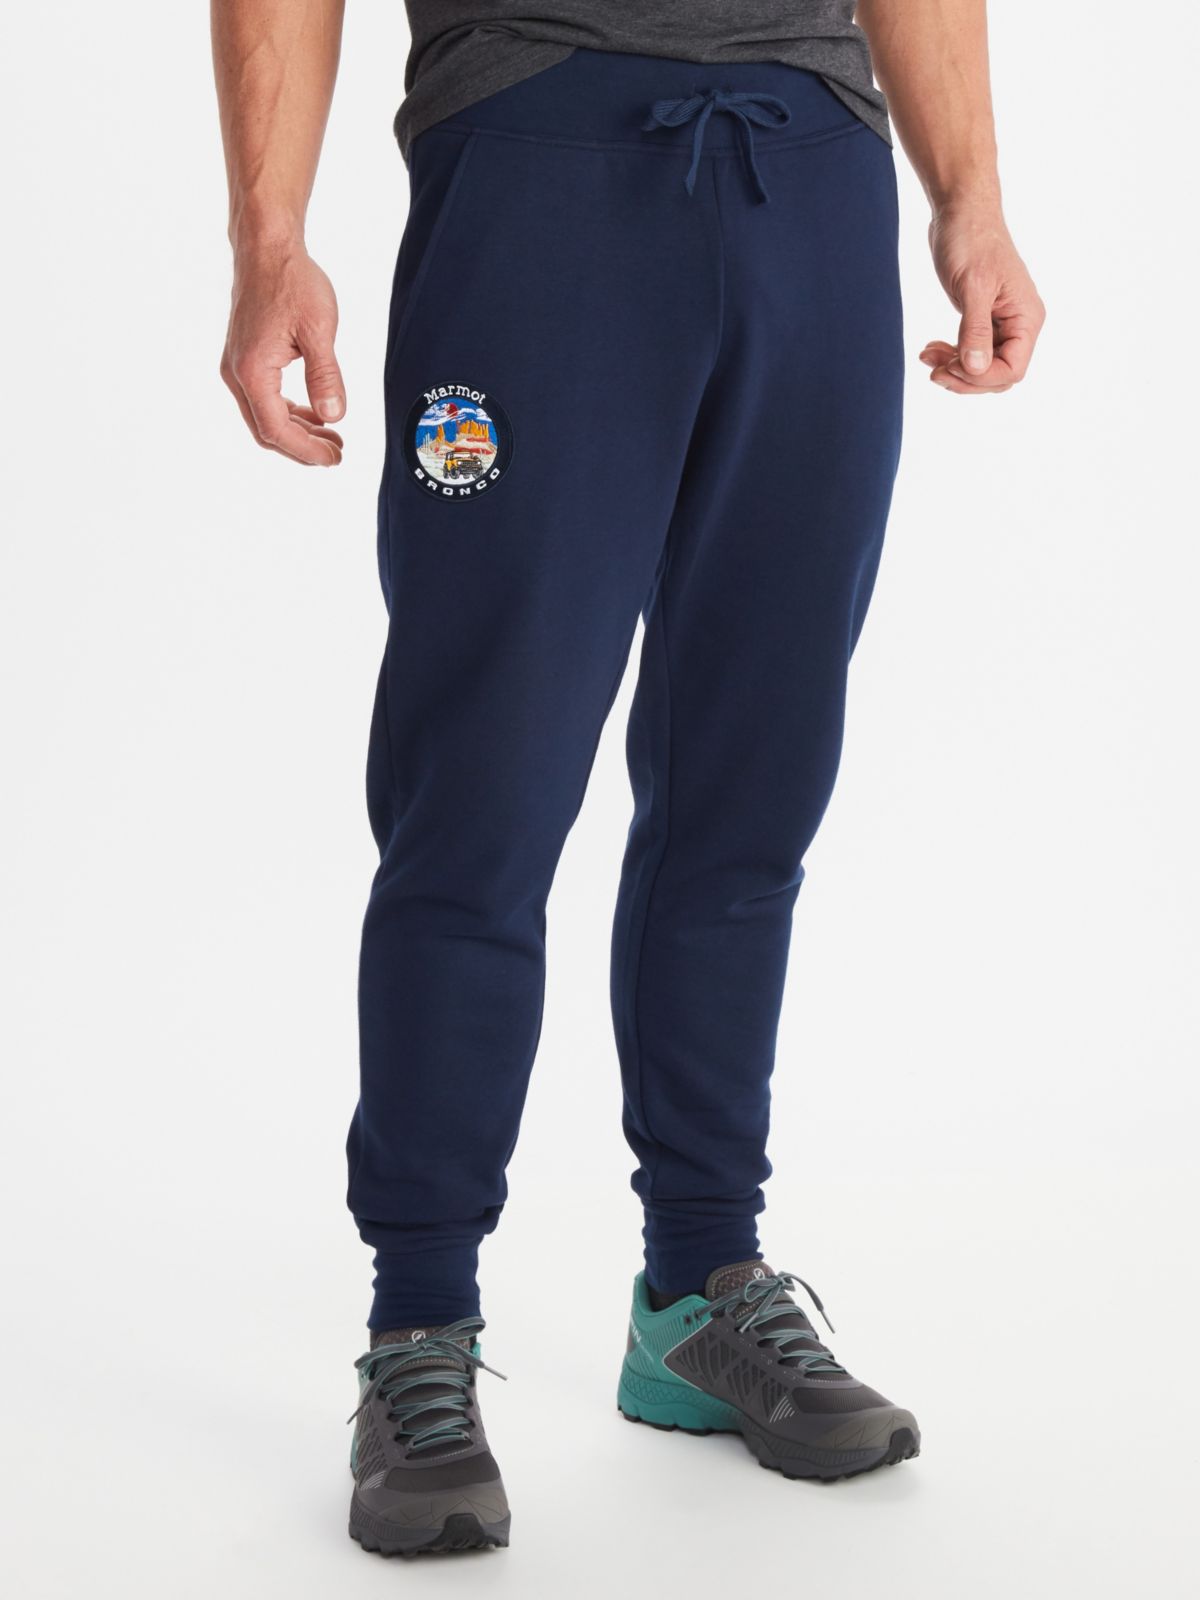 men's joggers on man front view